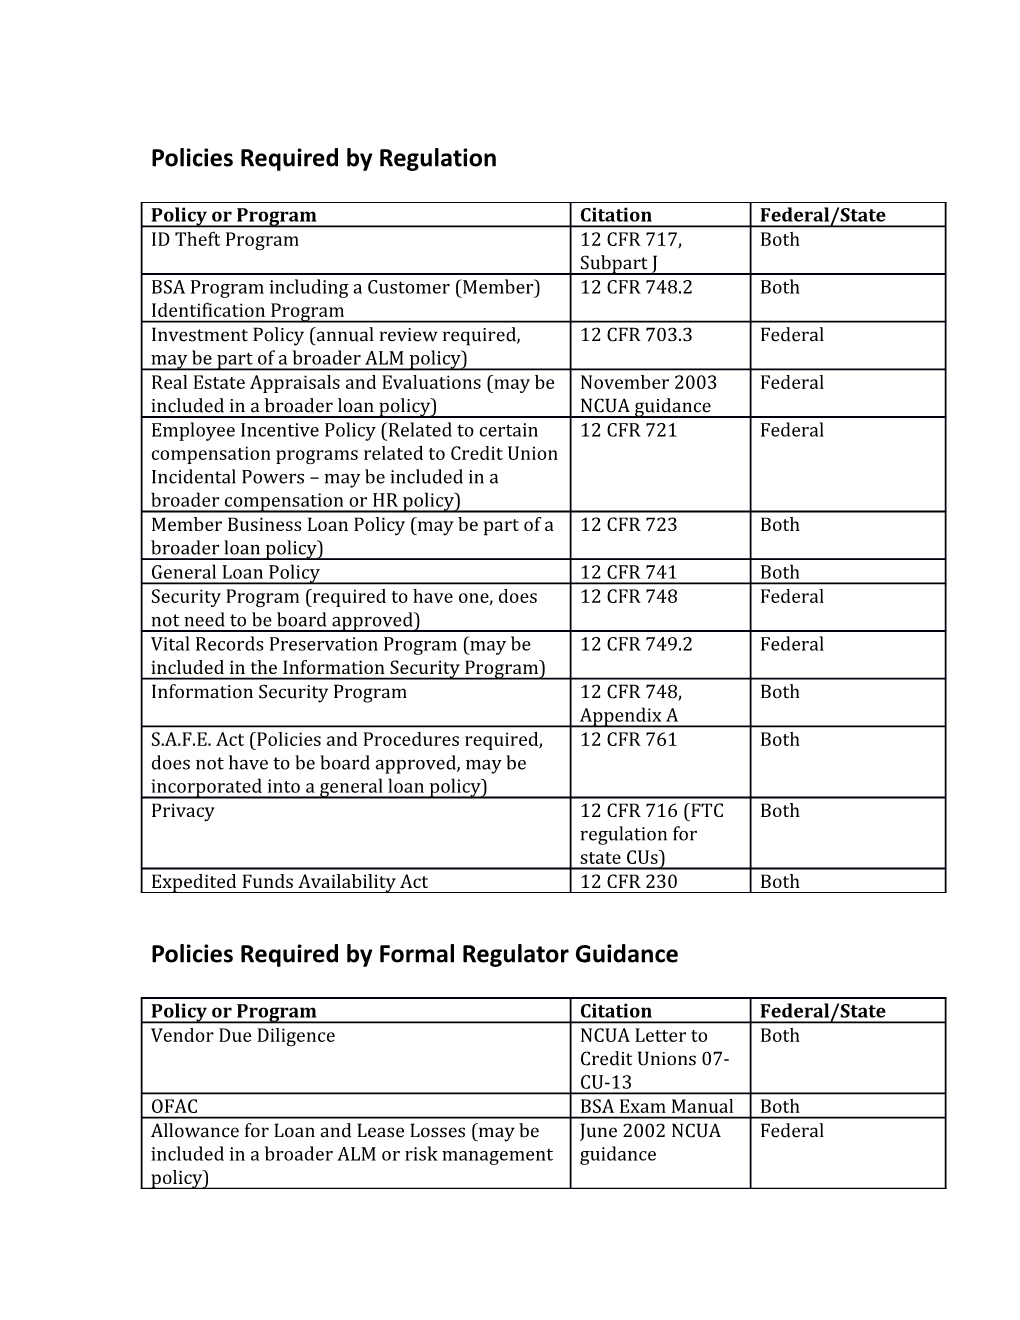 Policies Required by Formal Regulator Guidance